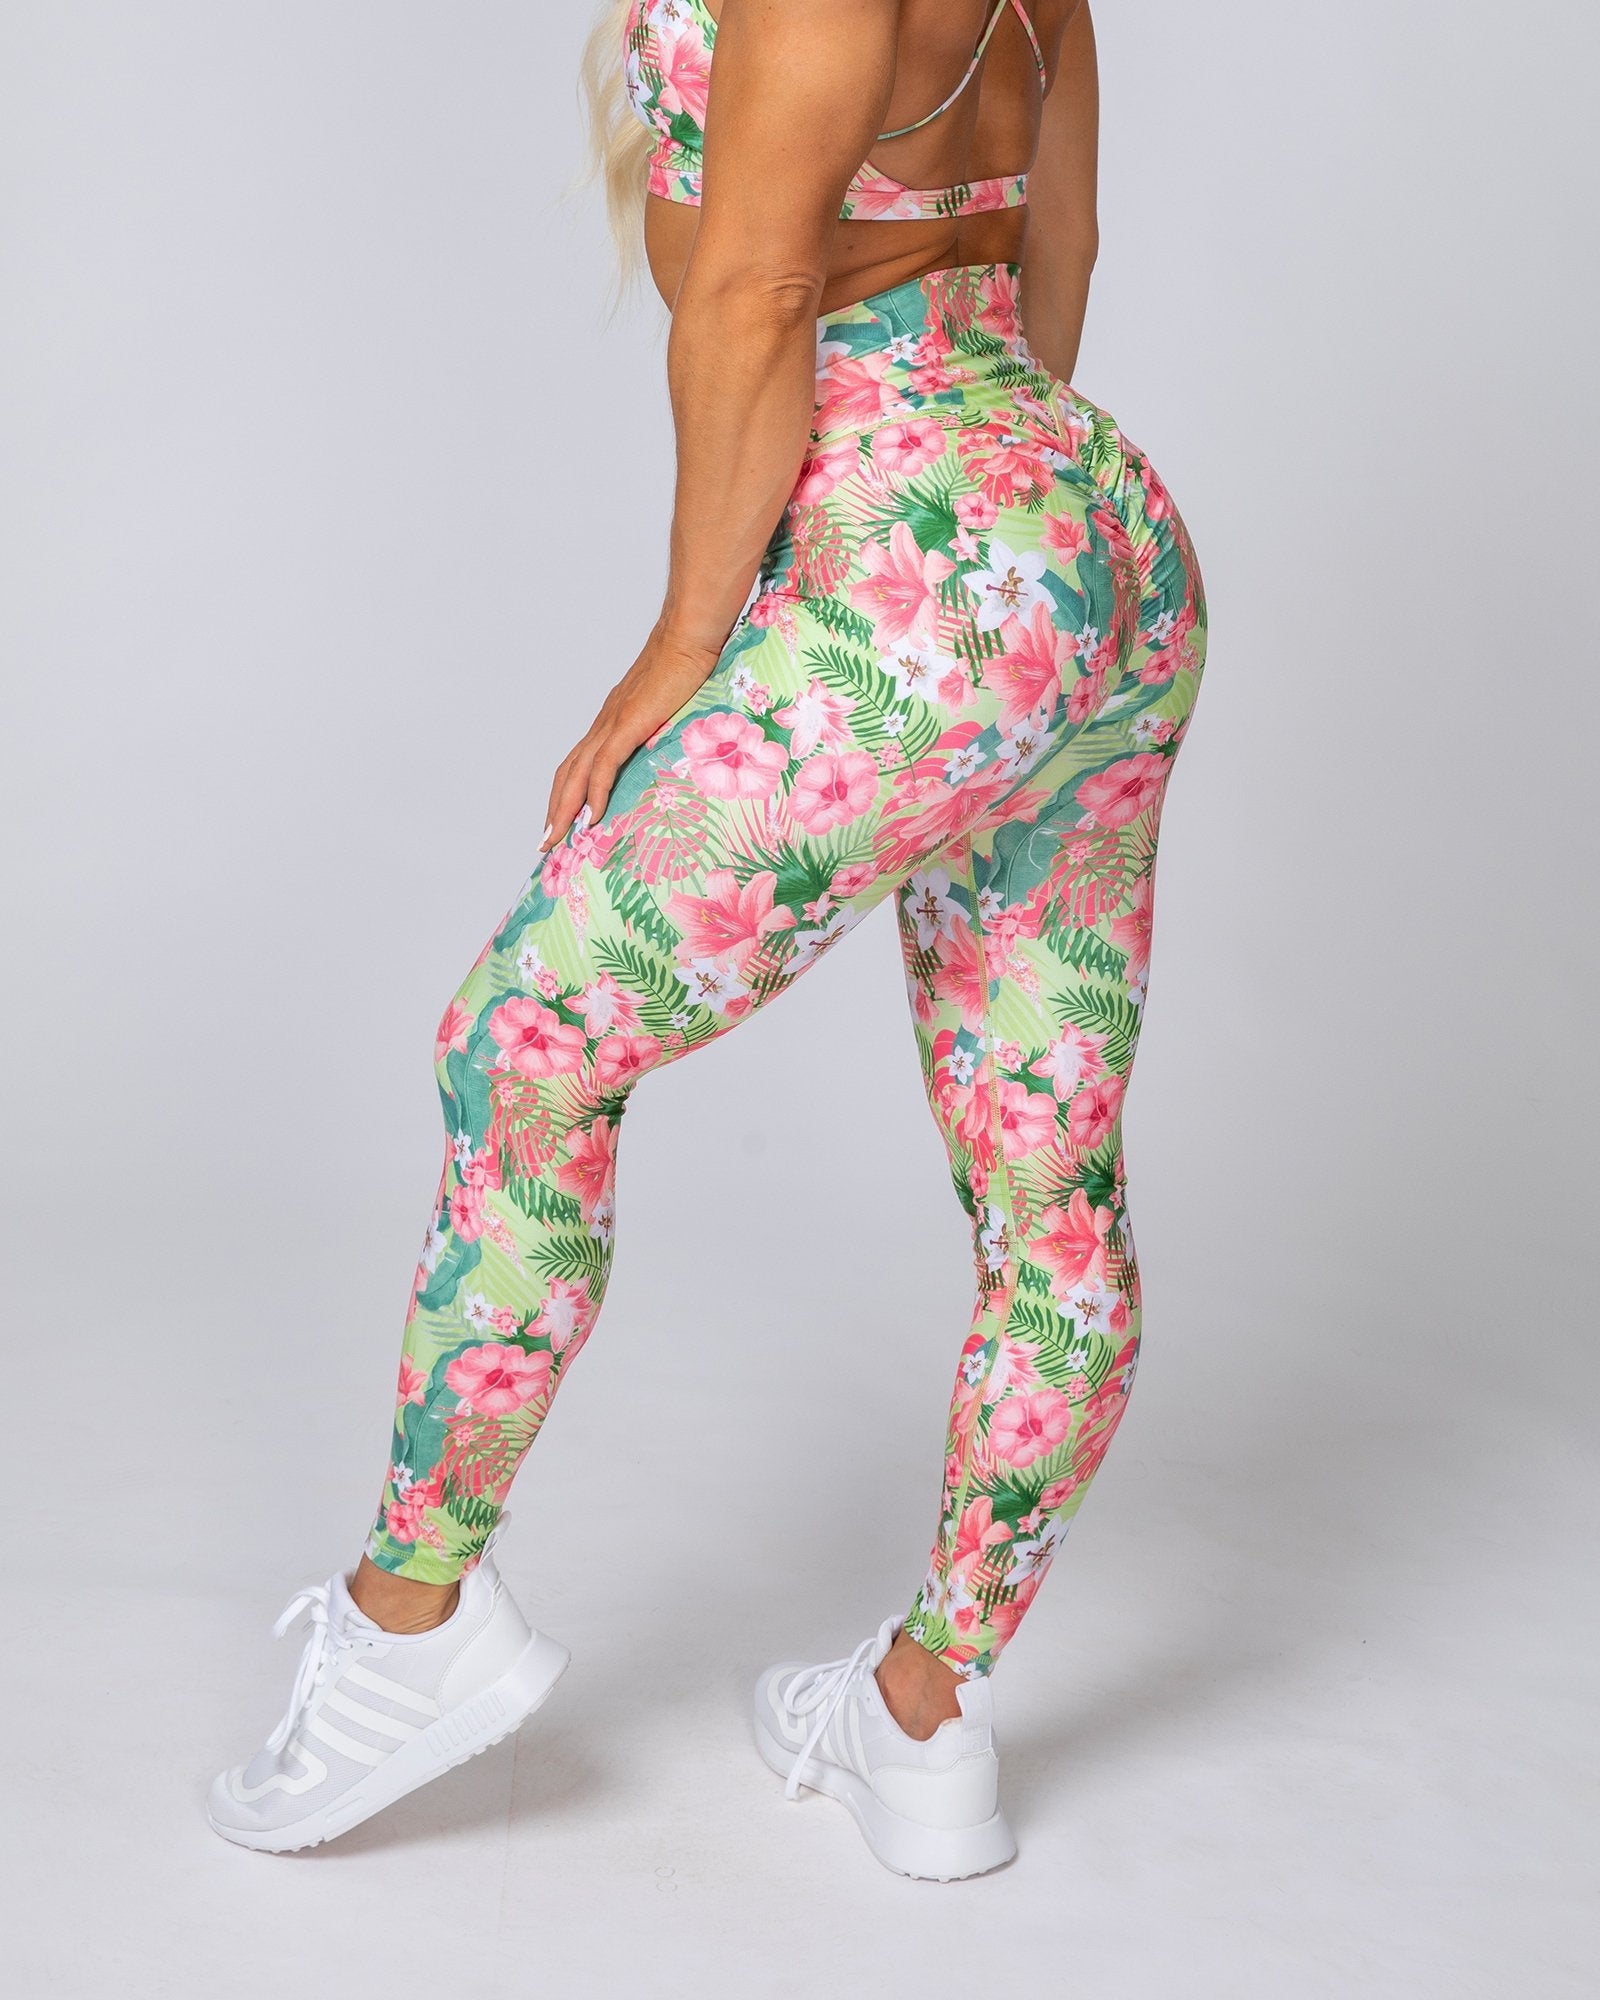 HBxMN Sweetheart Ankle Length Leggings - Tropical Floral - Muscle Nation